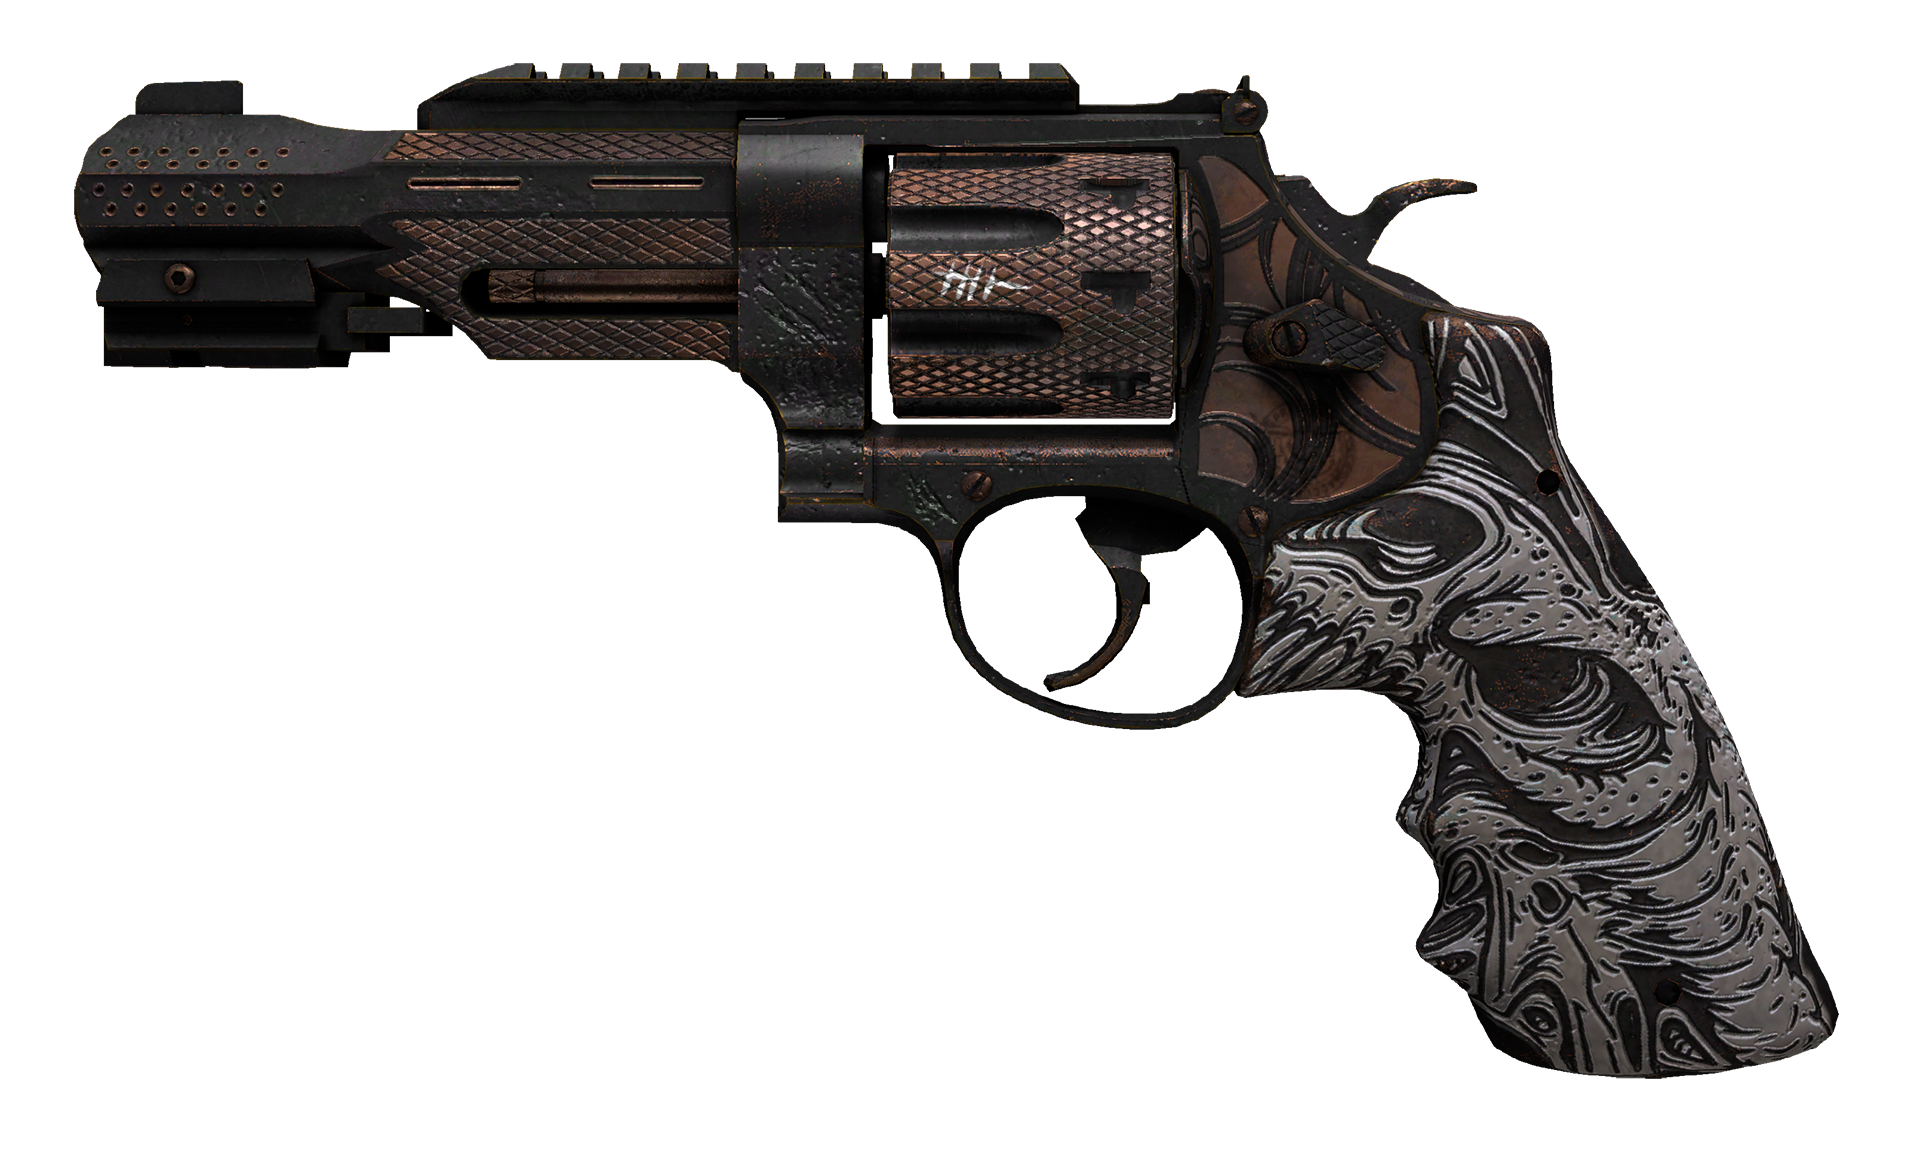 R8 Revolver Canal Spray cs go skin download the new version for iphone